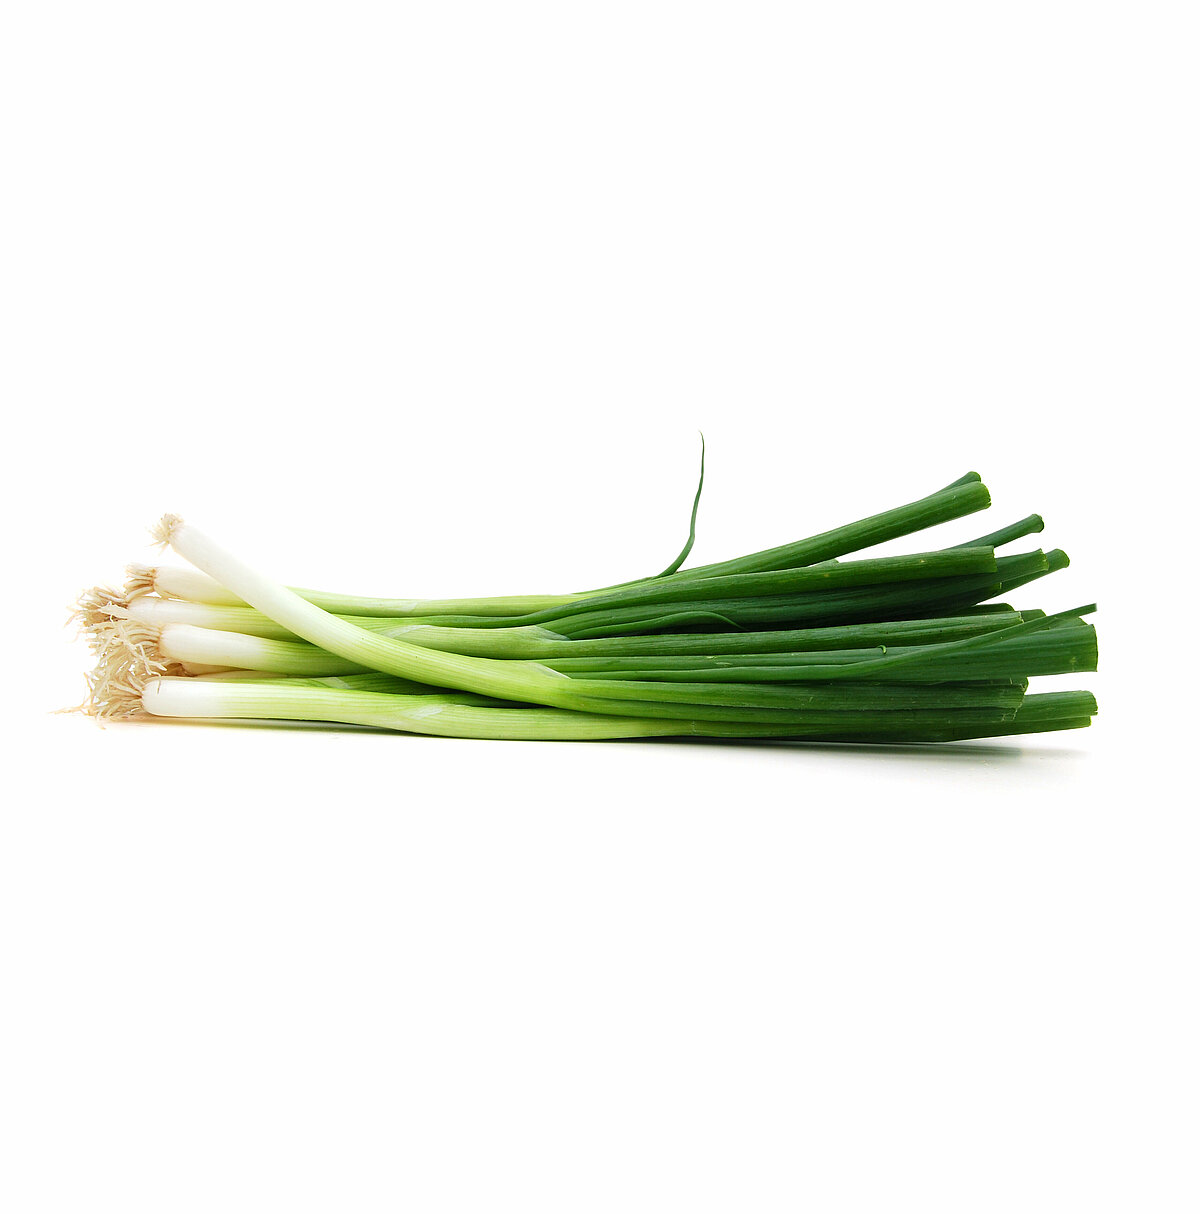 Spring onion cultivation for the best spring onions